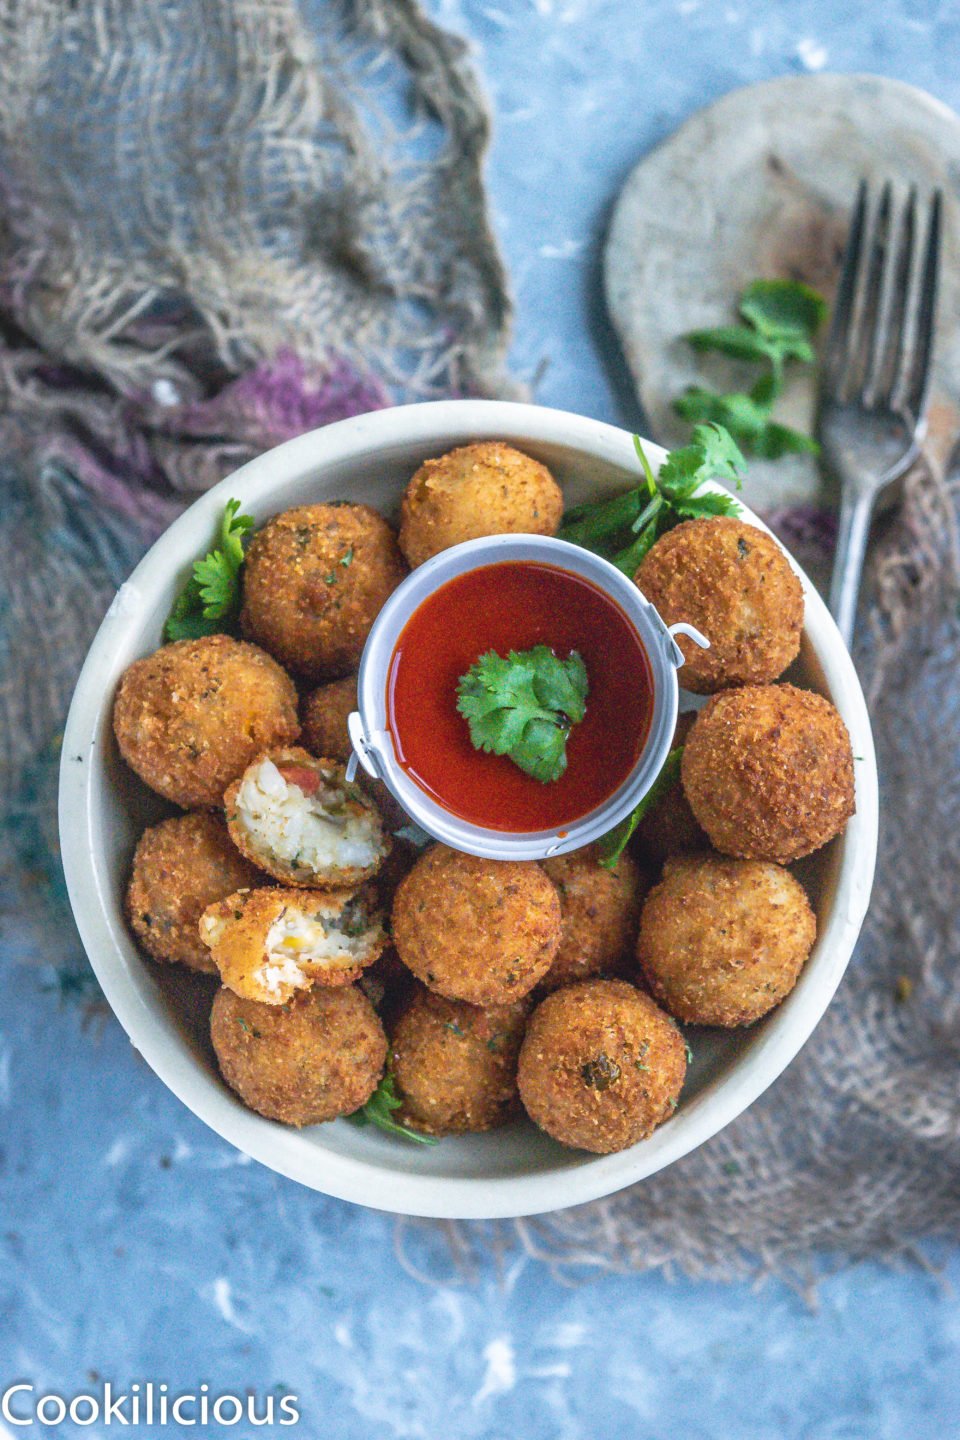 Semolina Vegetable Bites in a plate with a bowl of ketchup in the middle